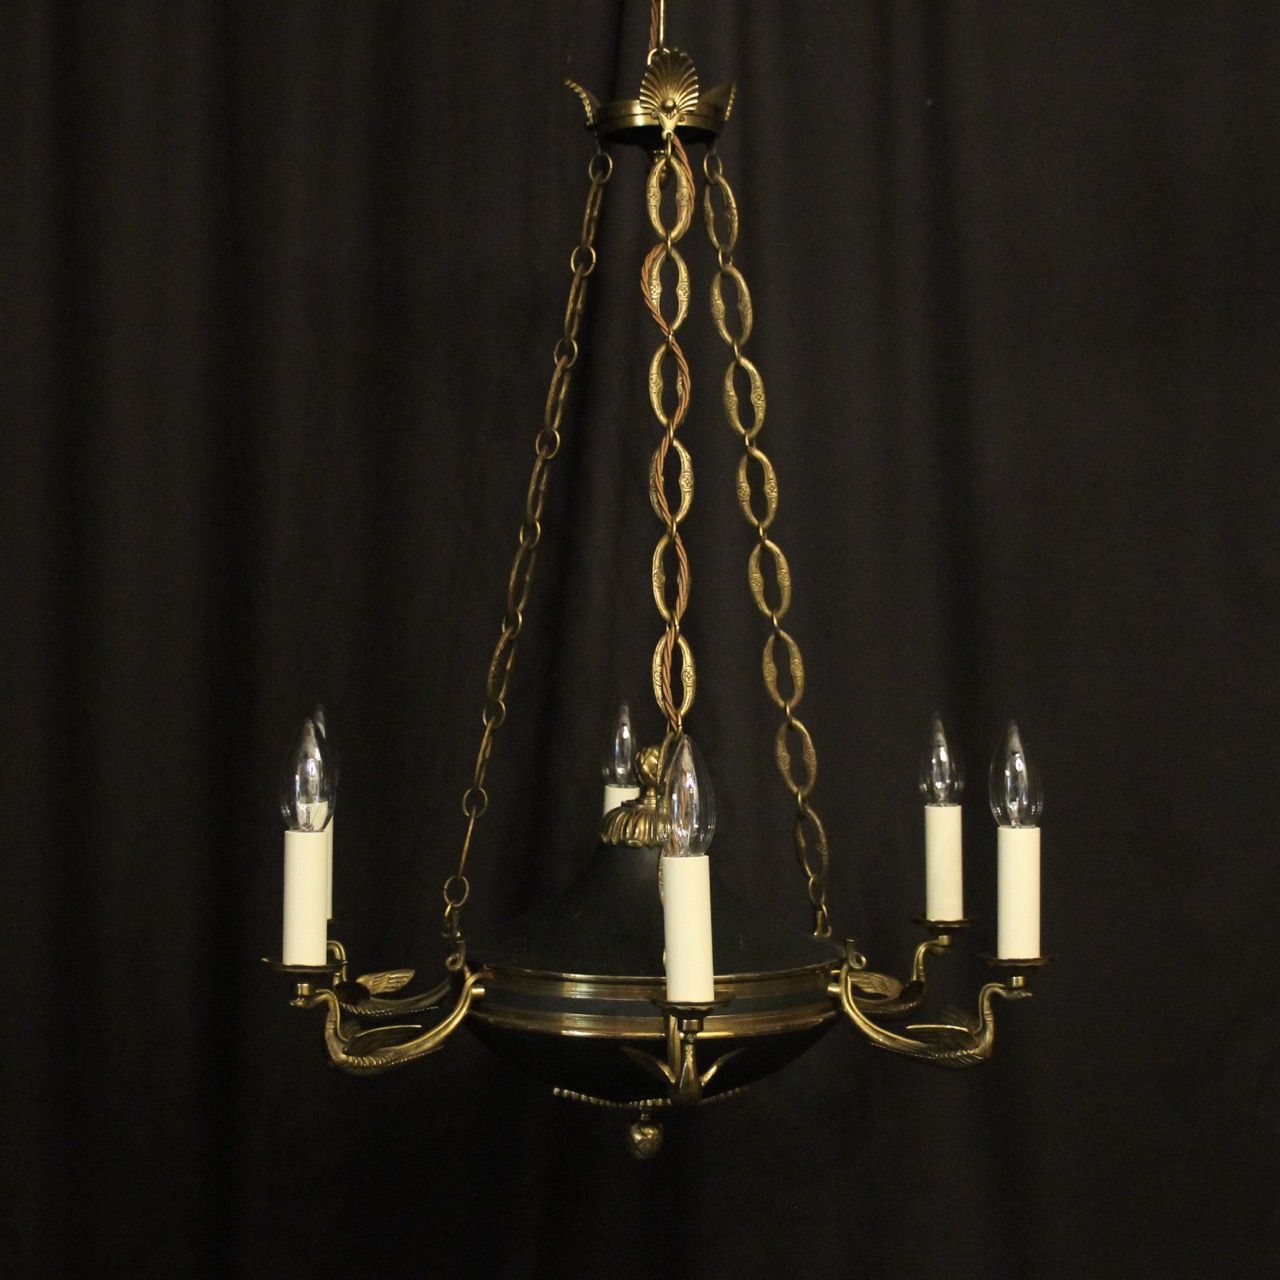 French Gilded Brass Empire 6 Light Chandelier – O'keeffe With Regard To Natural Brass Six Light Chandeliers (View 10 of 15)